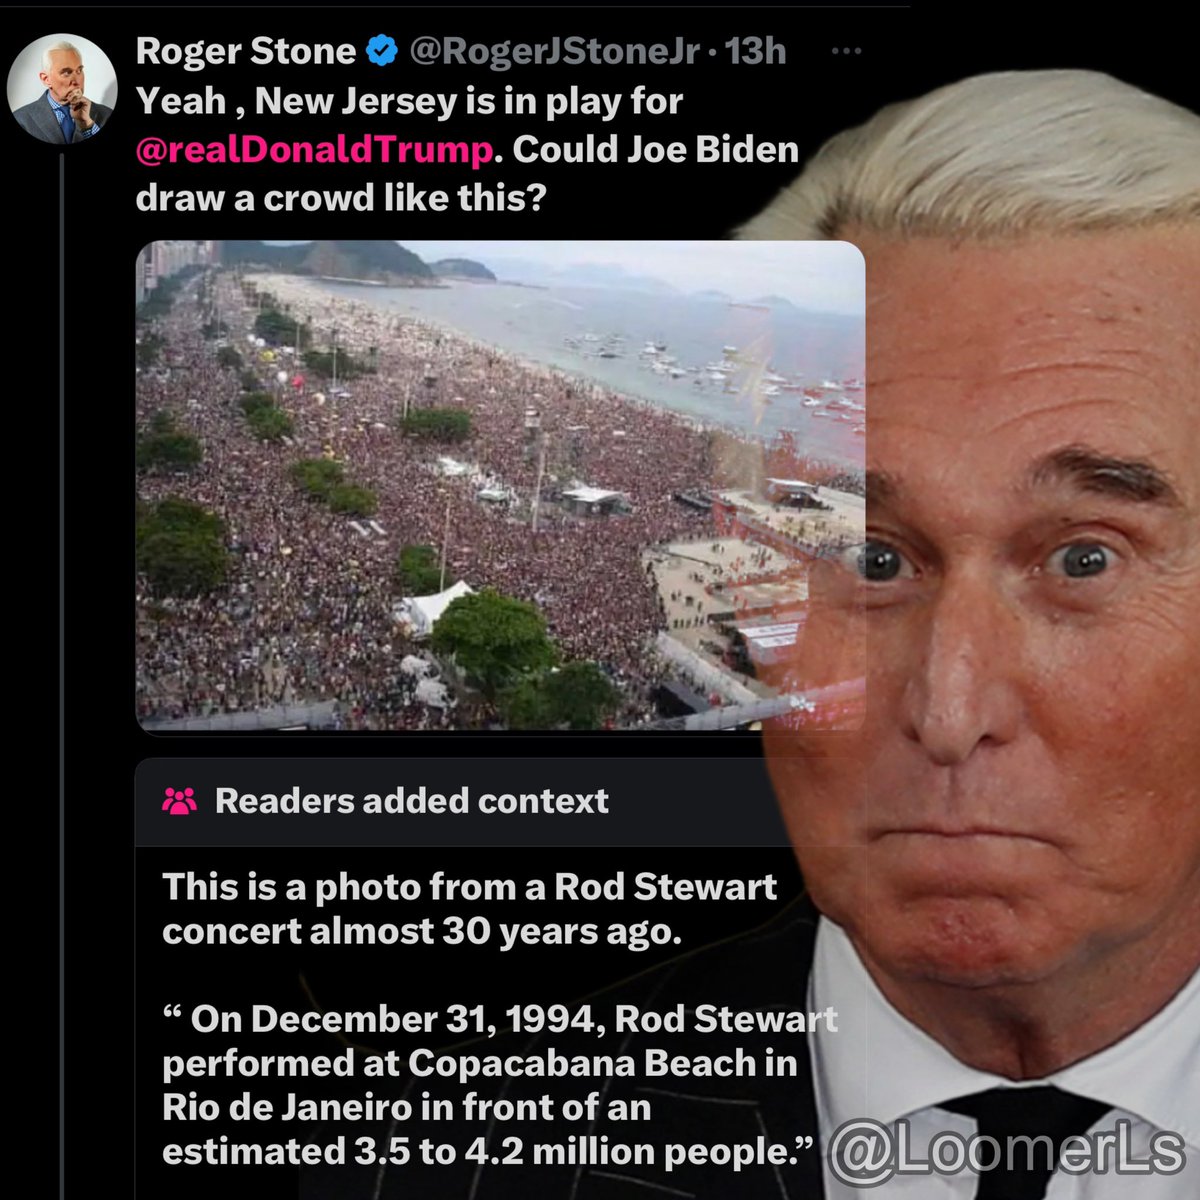 Roger Stone L. He tried it, failed, then tried to play it off like it was a joke when he got noted for it.